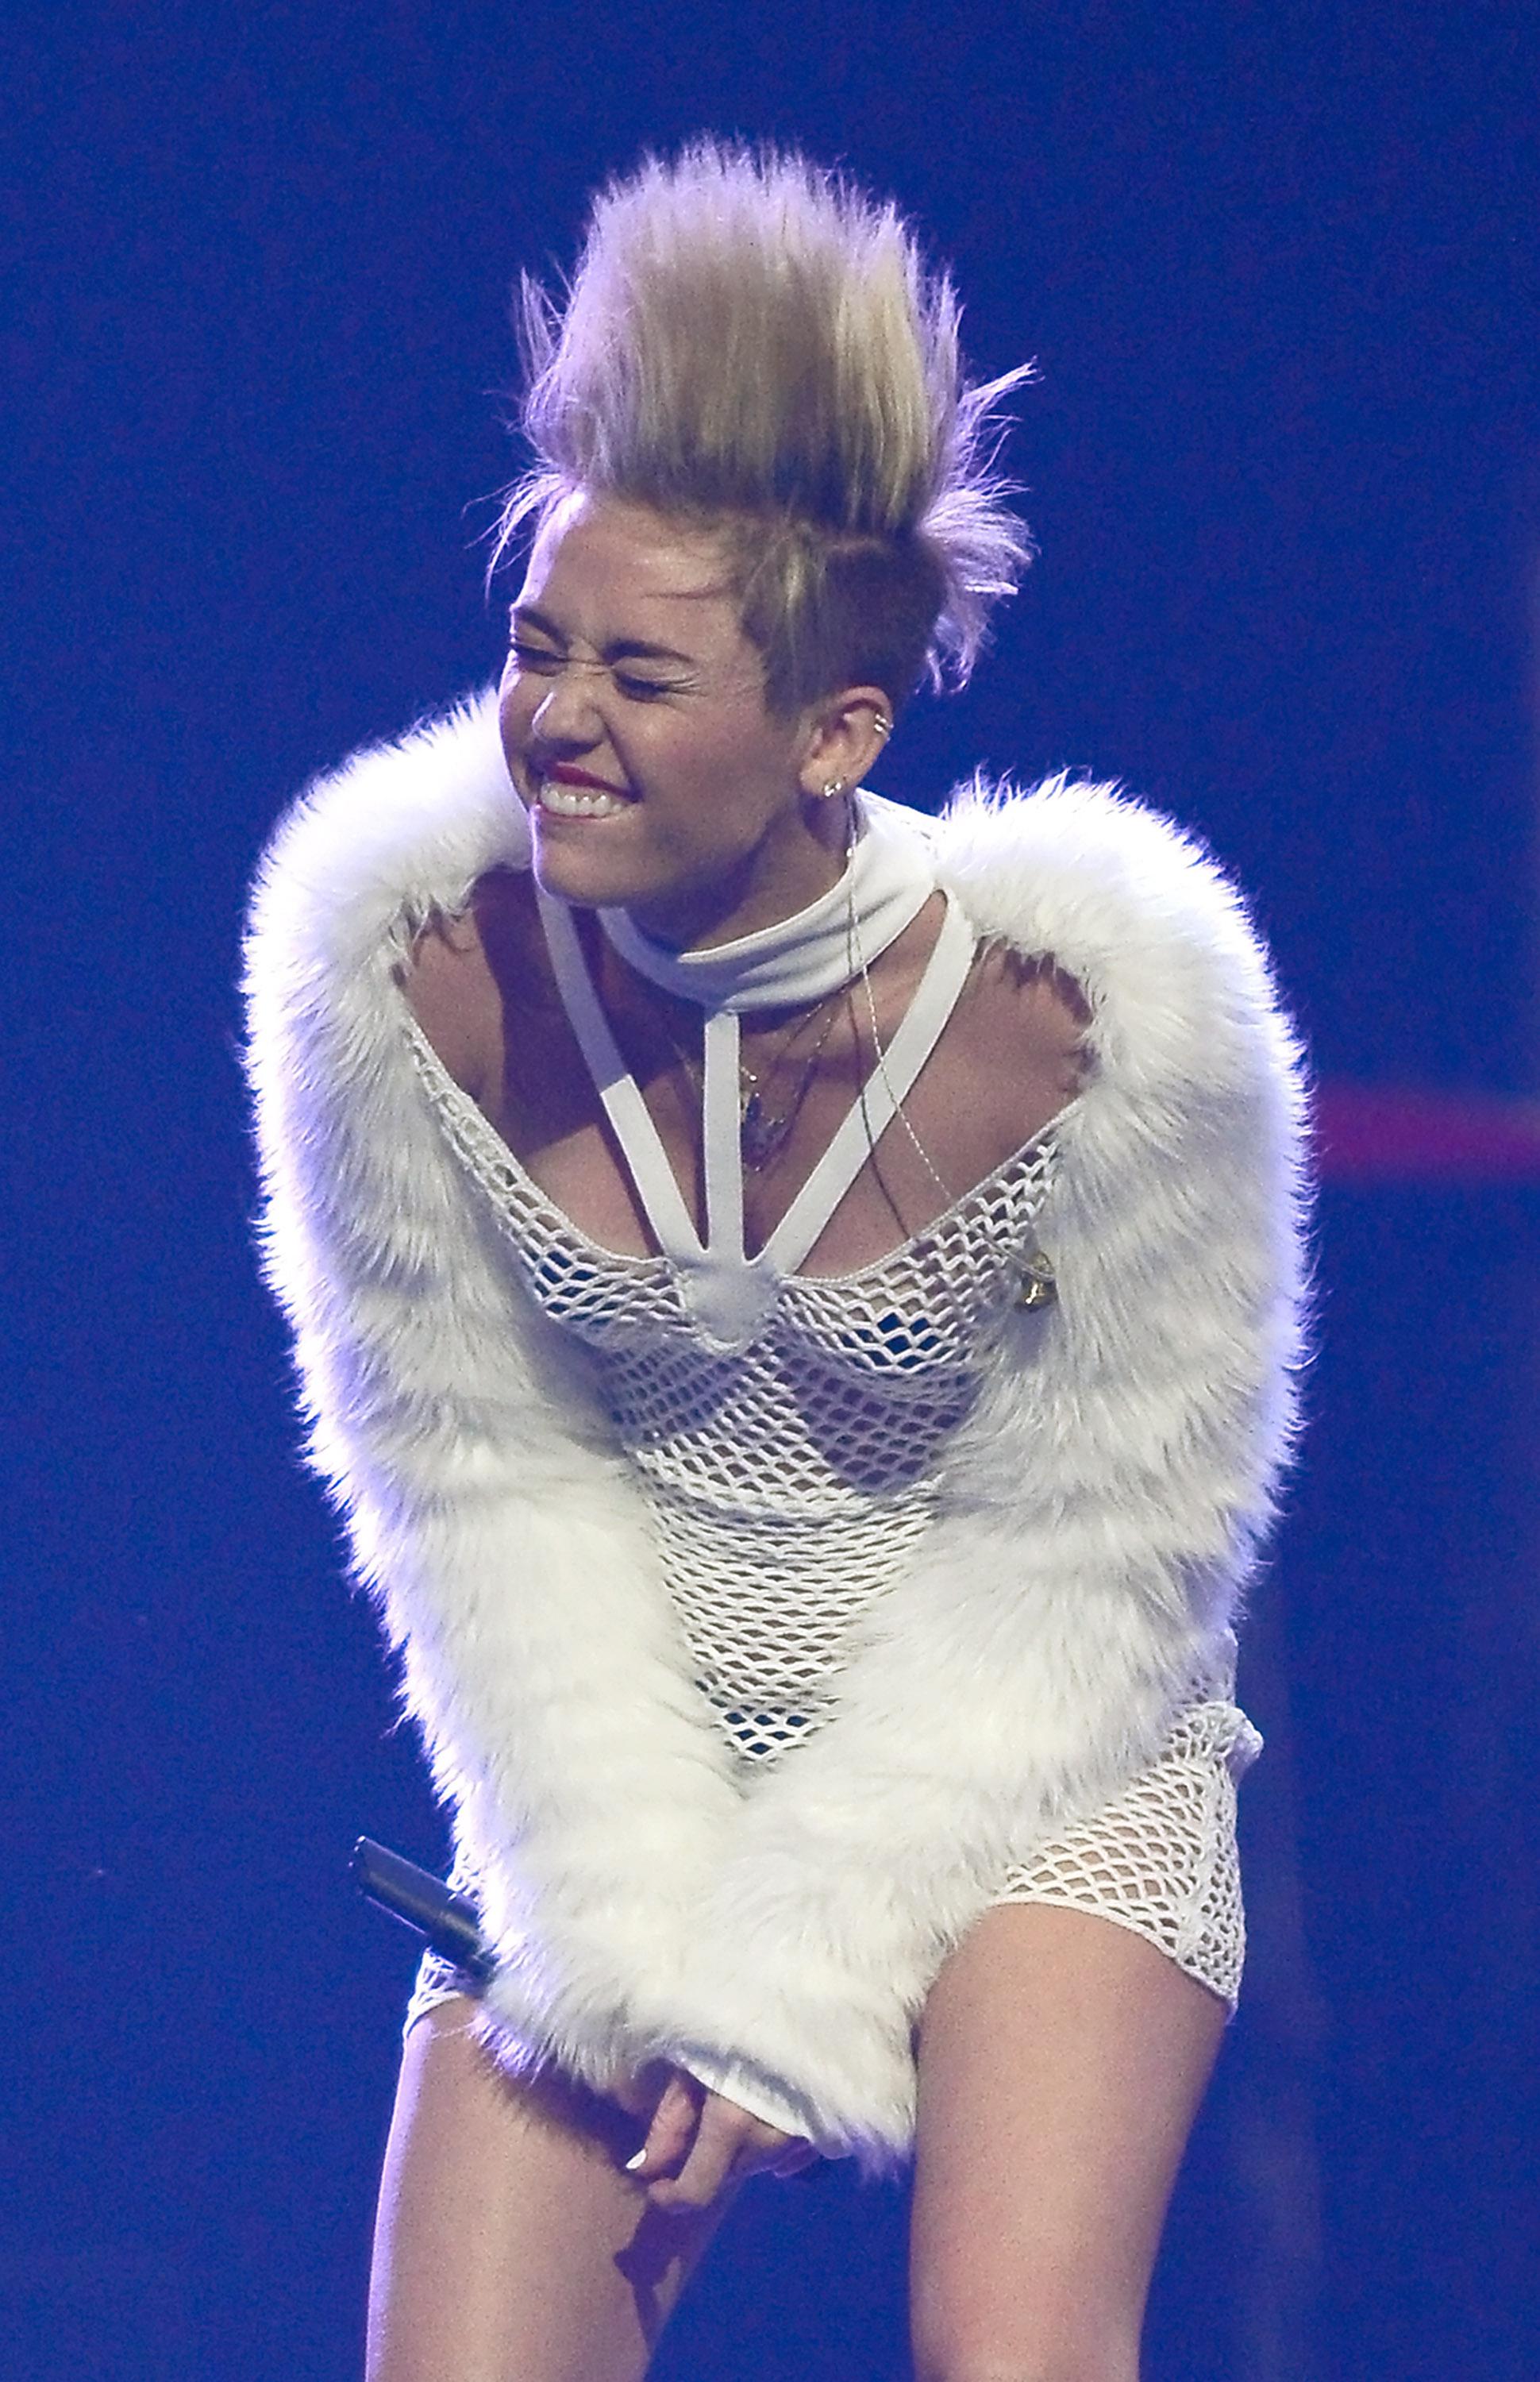 Miley Cyrus performing with spiked hair